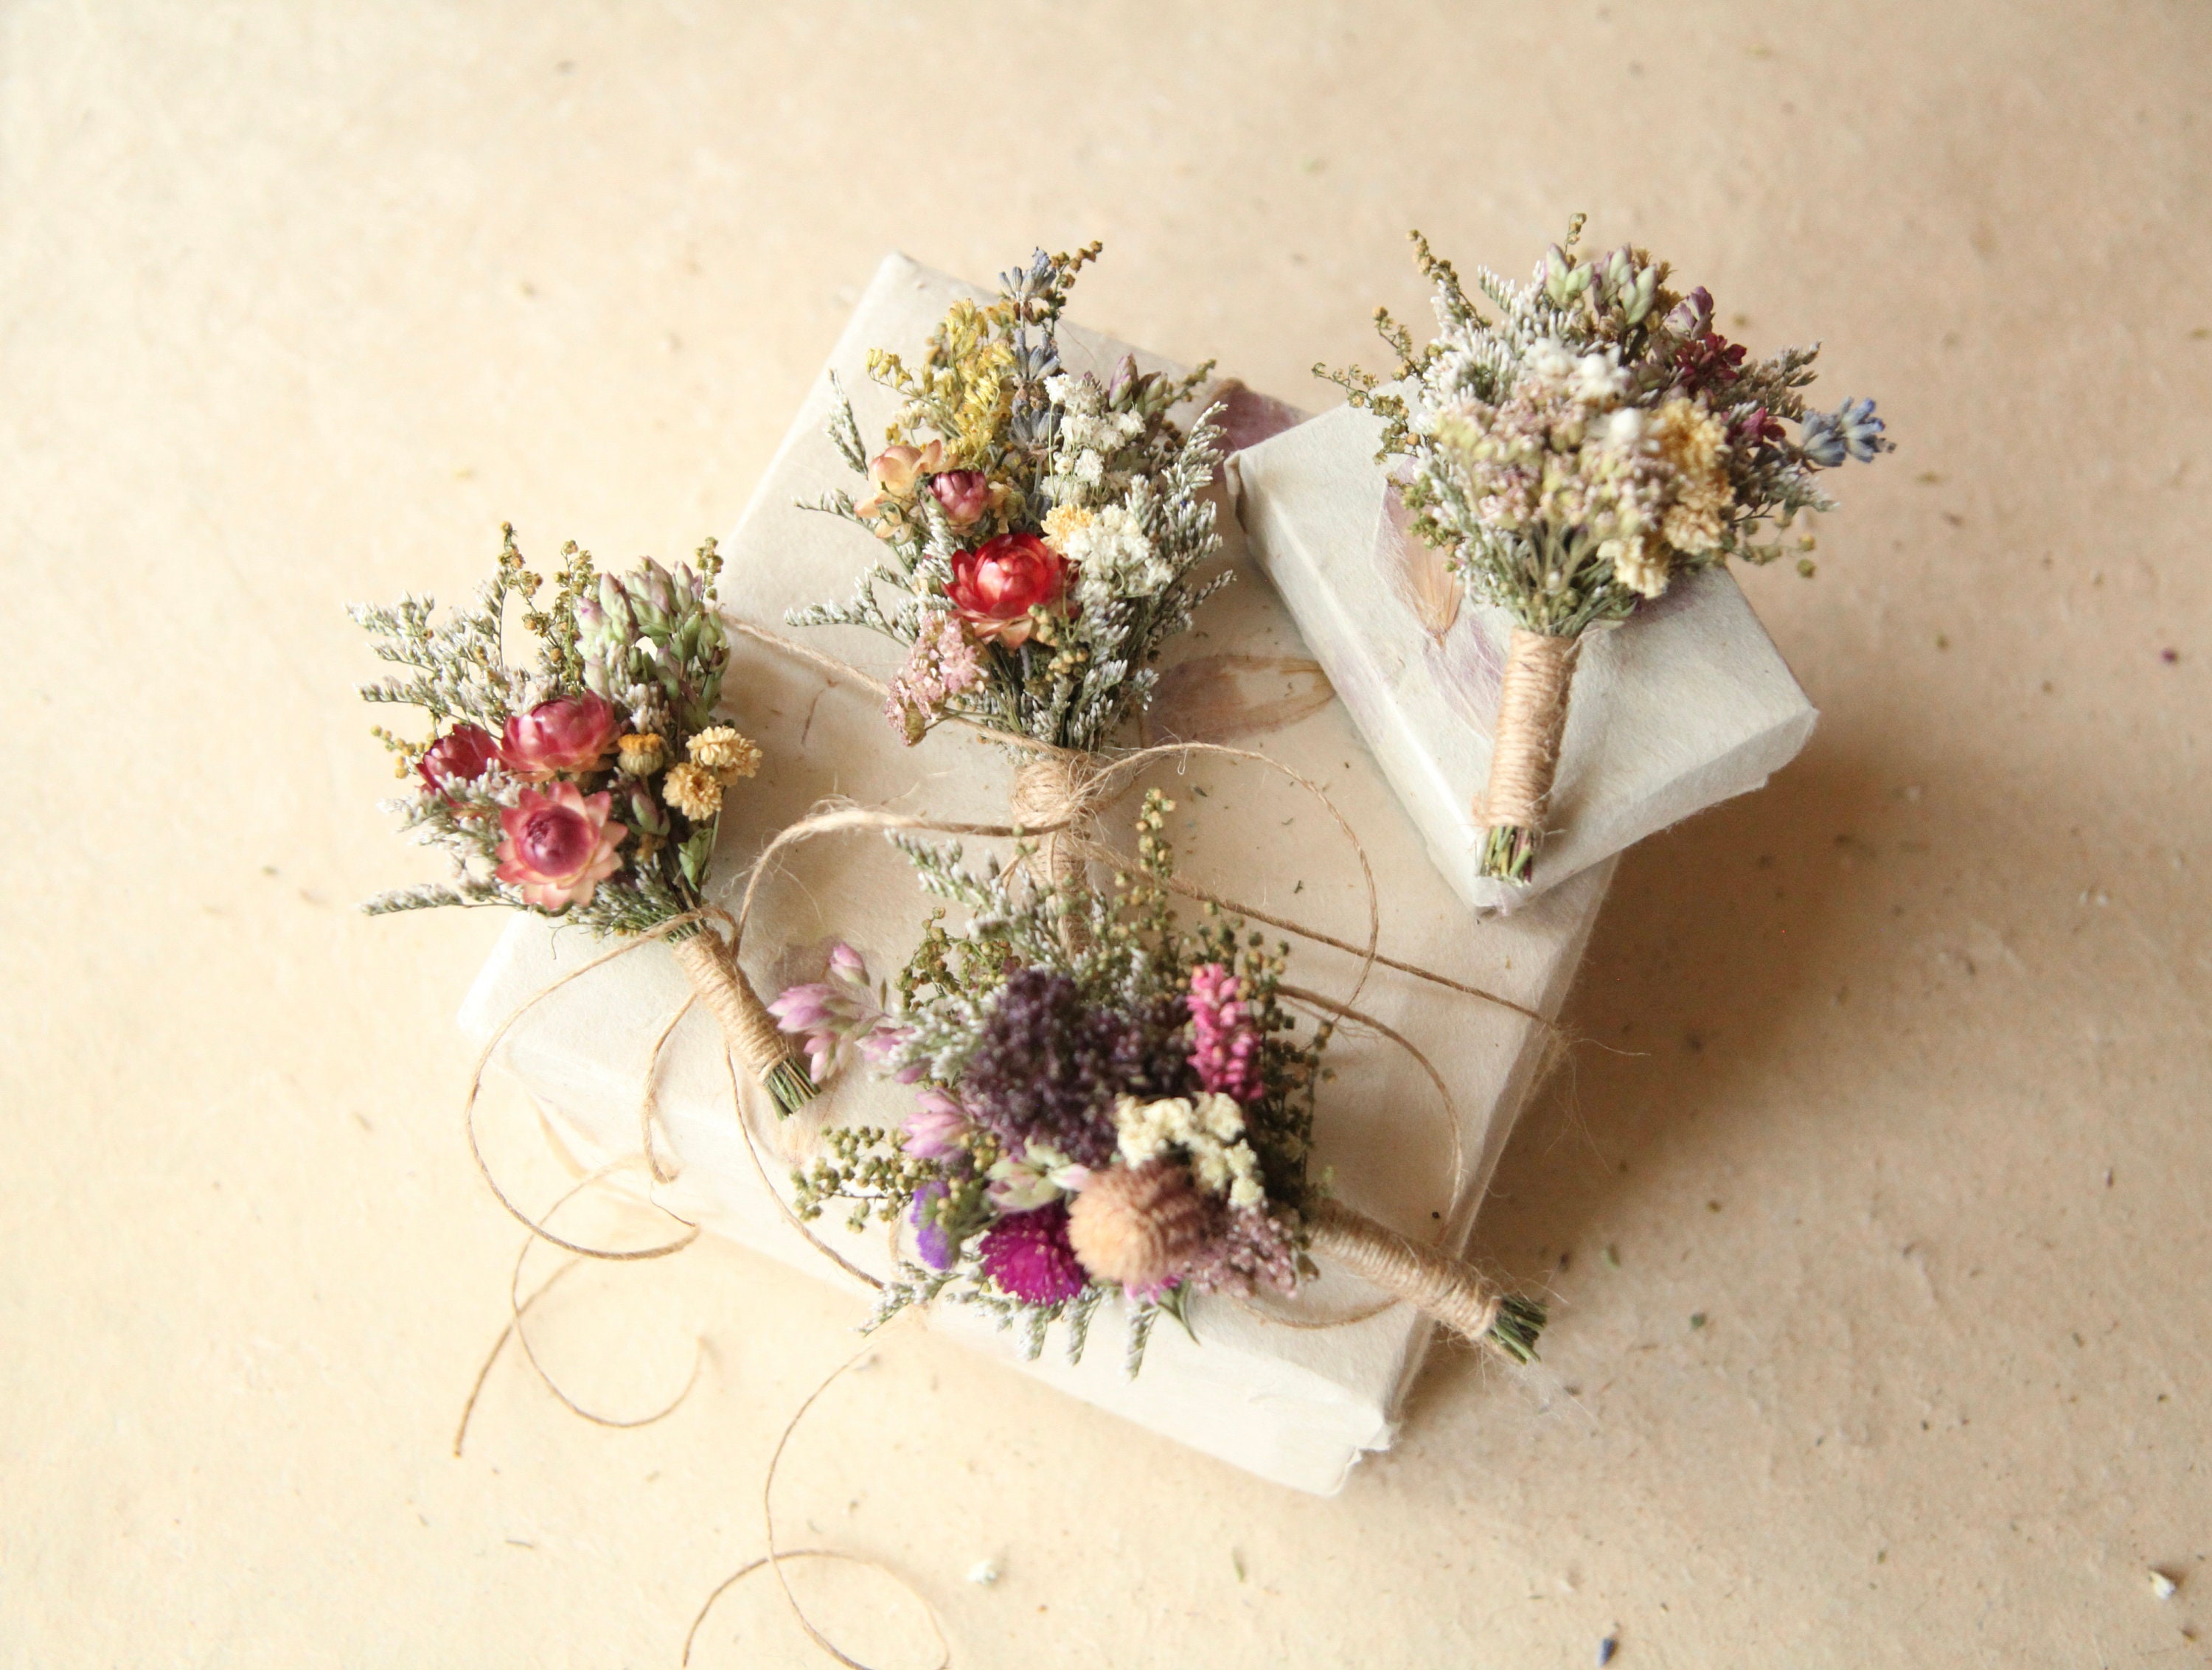 Decorative Flowers Corsage Magnetic Buckle Boutonniere Clips Fixator Small  Flower Holder DIY Magnets Bride Bouquet From Zuiyifu, $14.79